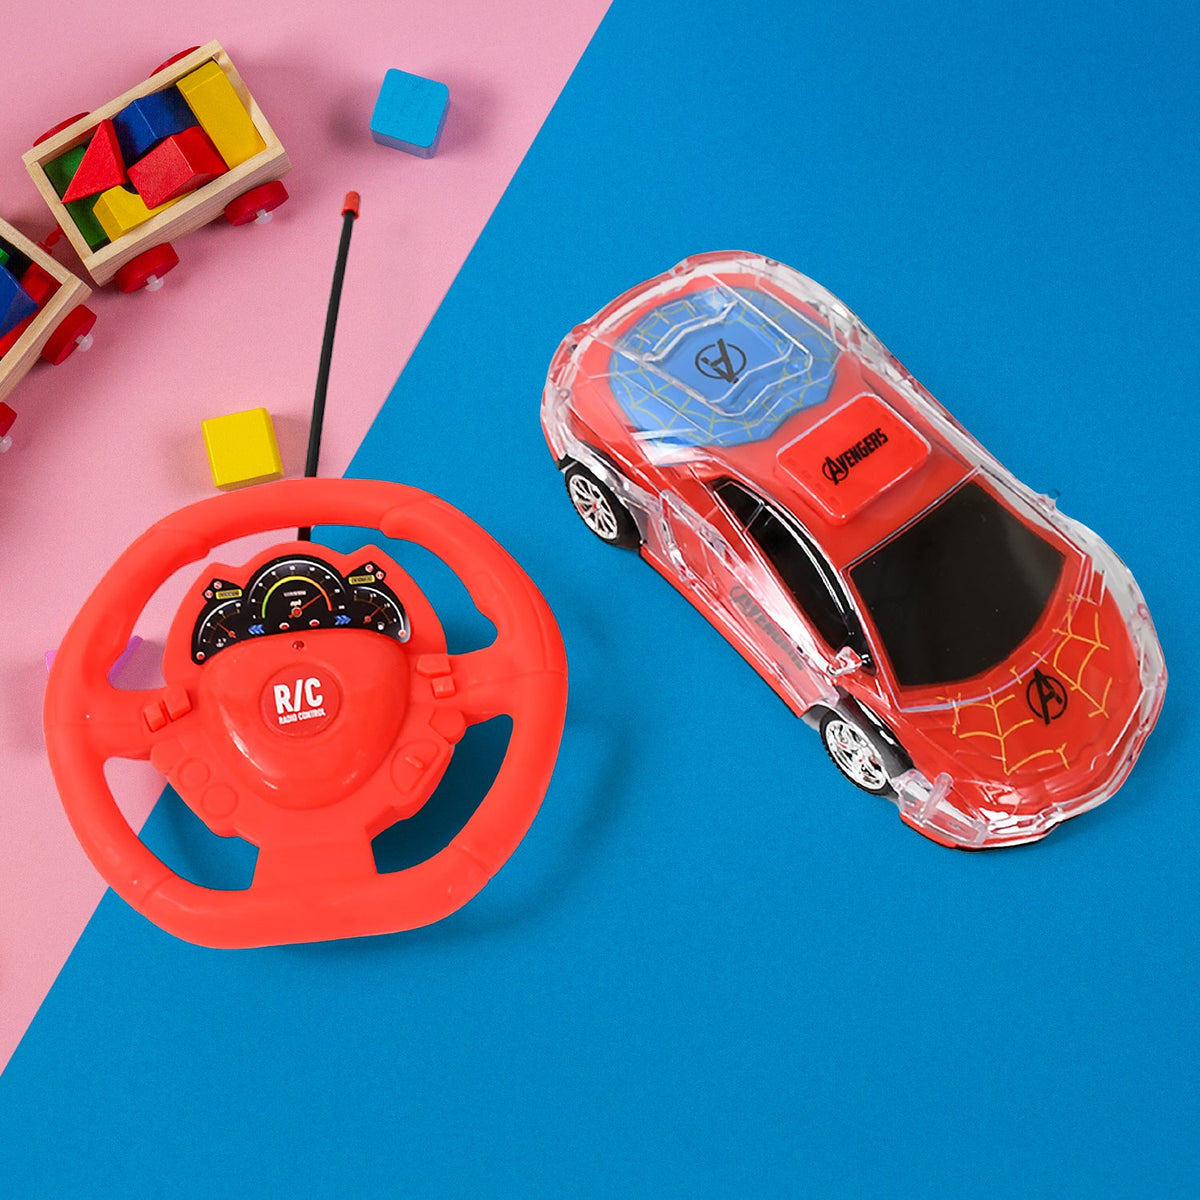 17927 Plastic Remote Control Car, Remote Control Racing car with Two Function Backward and Forward. Handle Design Remote. Best Birthday Gift, Birthday Return Gift with Rechargeable Battery For Car